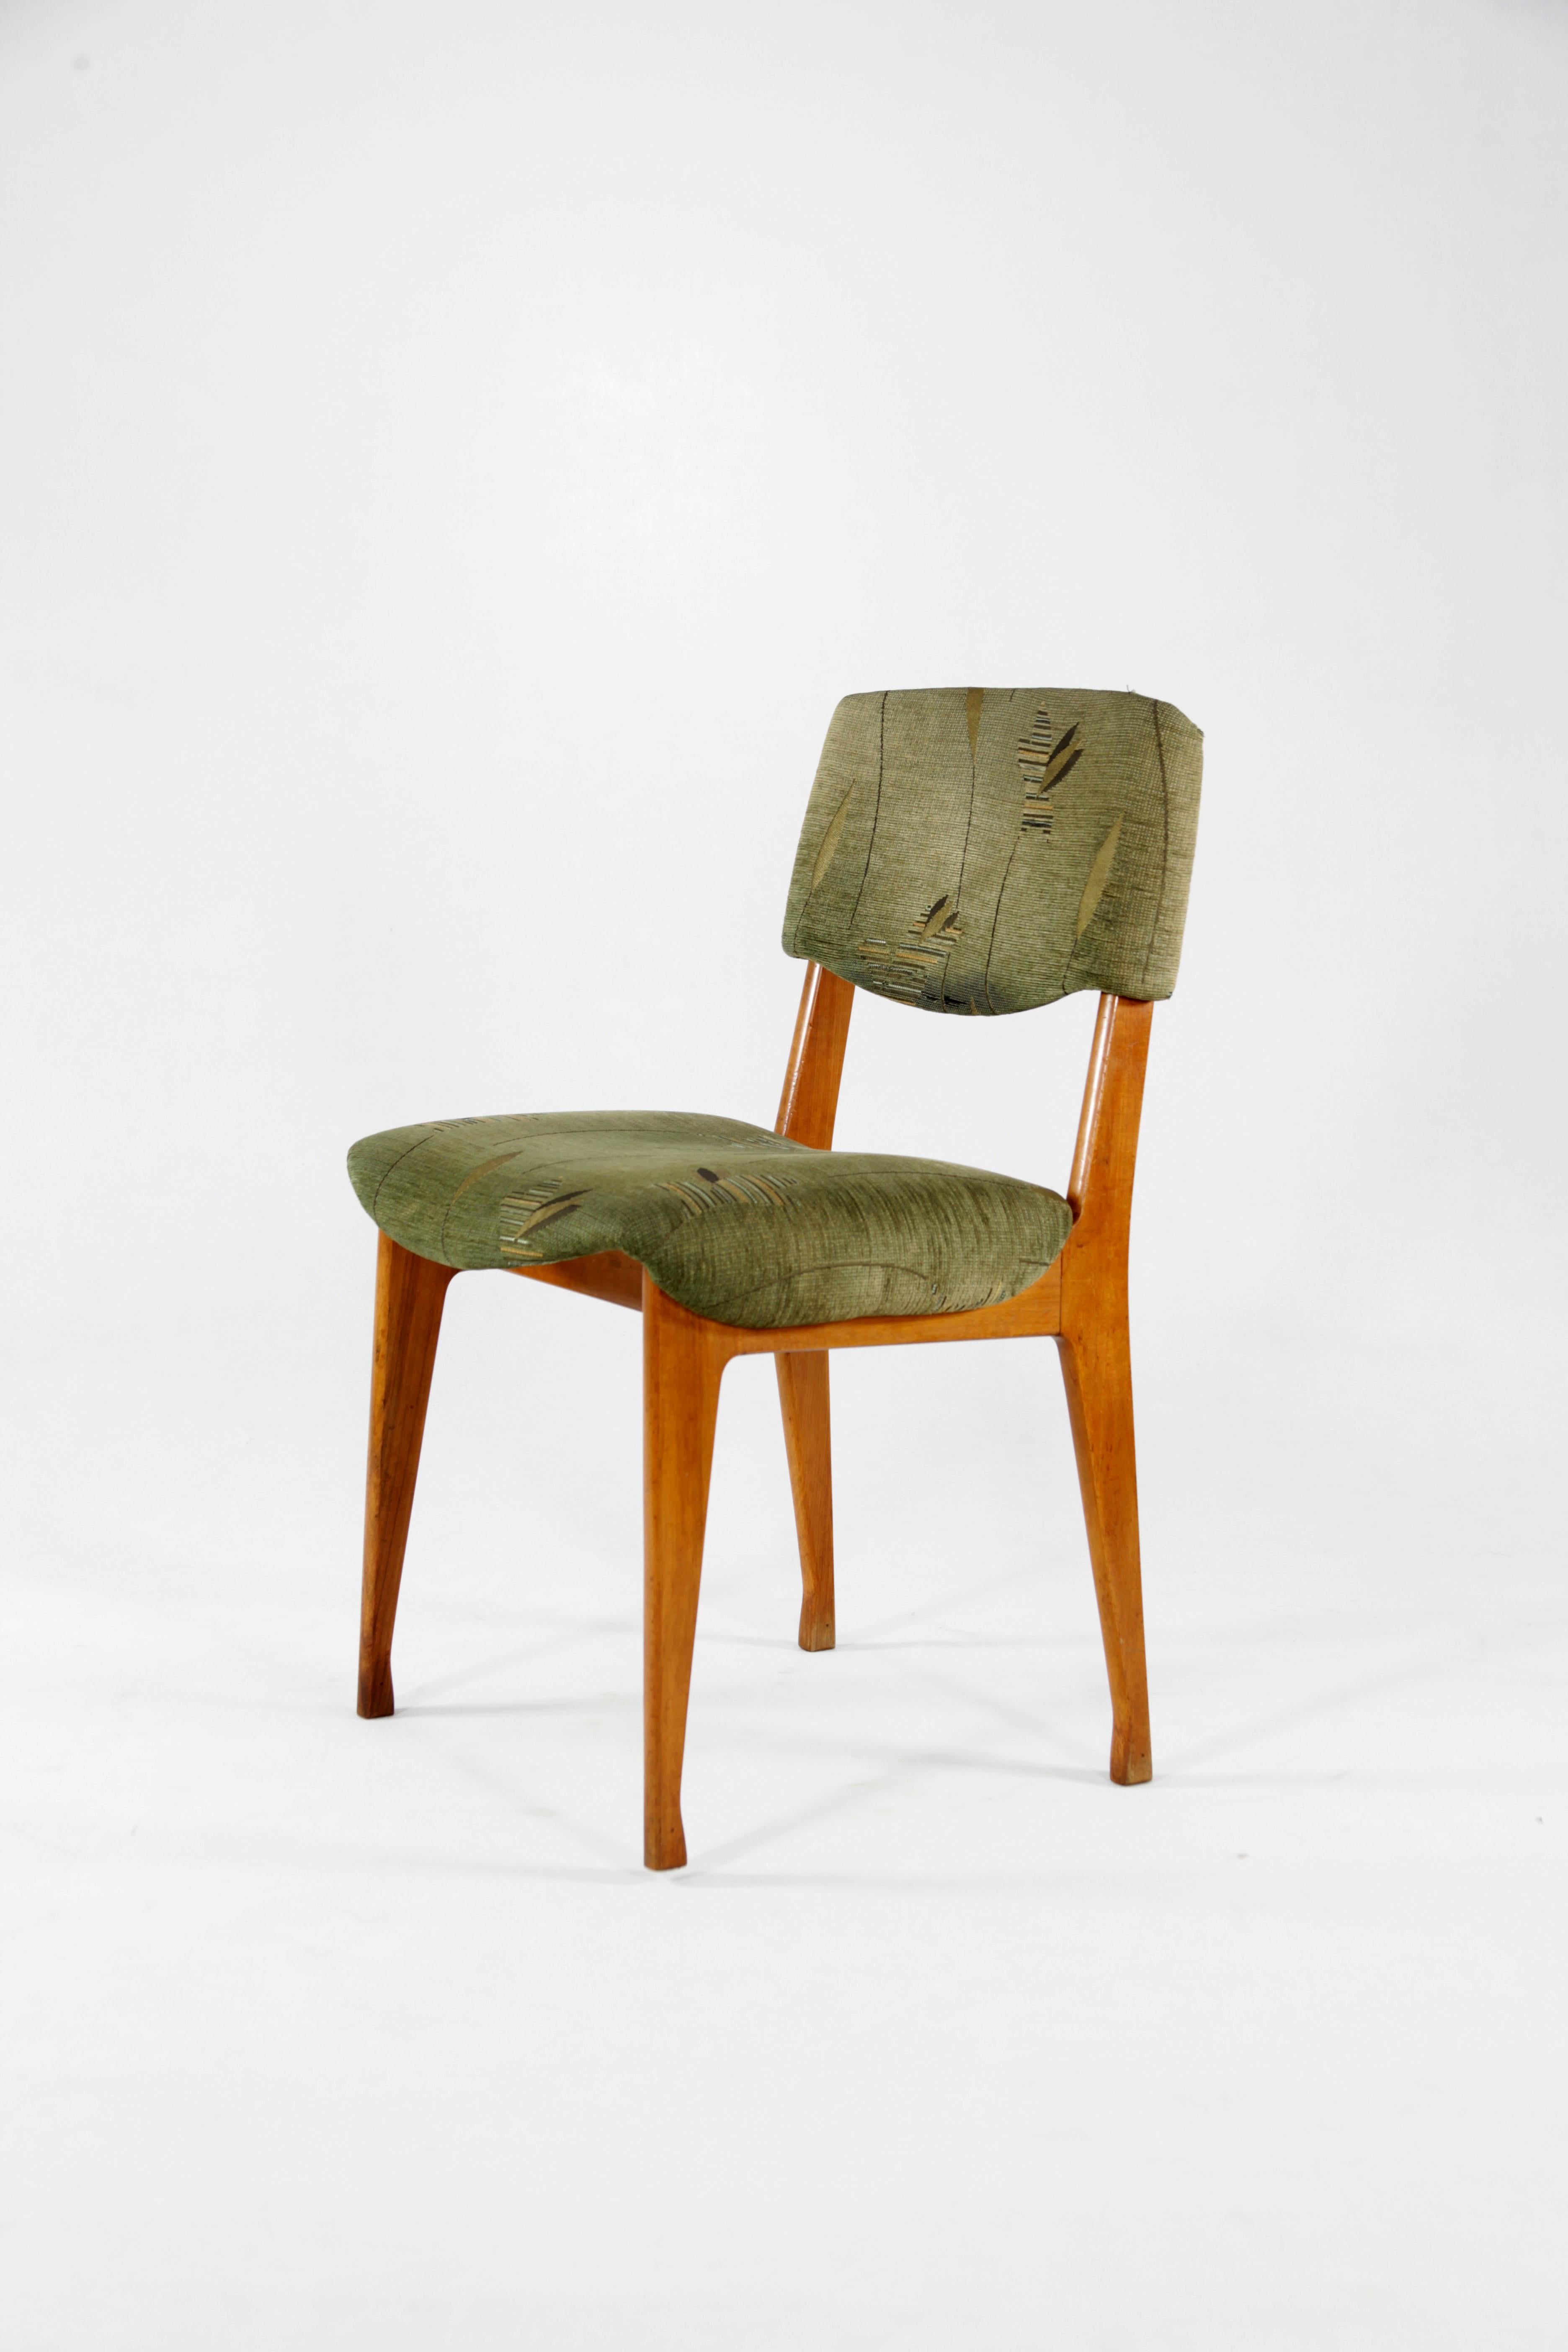 Ico Parisi for MIM, Six Italian Wooden Dining Chairs, Green Fabric Seats, 1950 For Sale 1